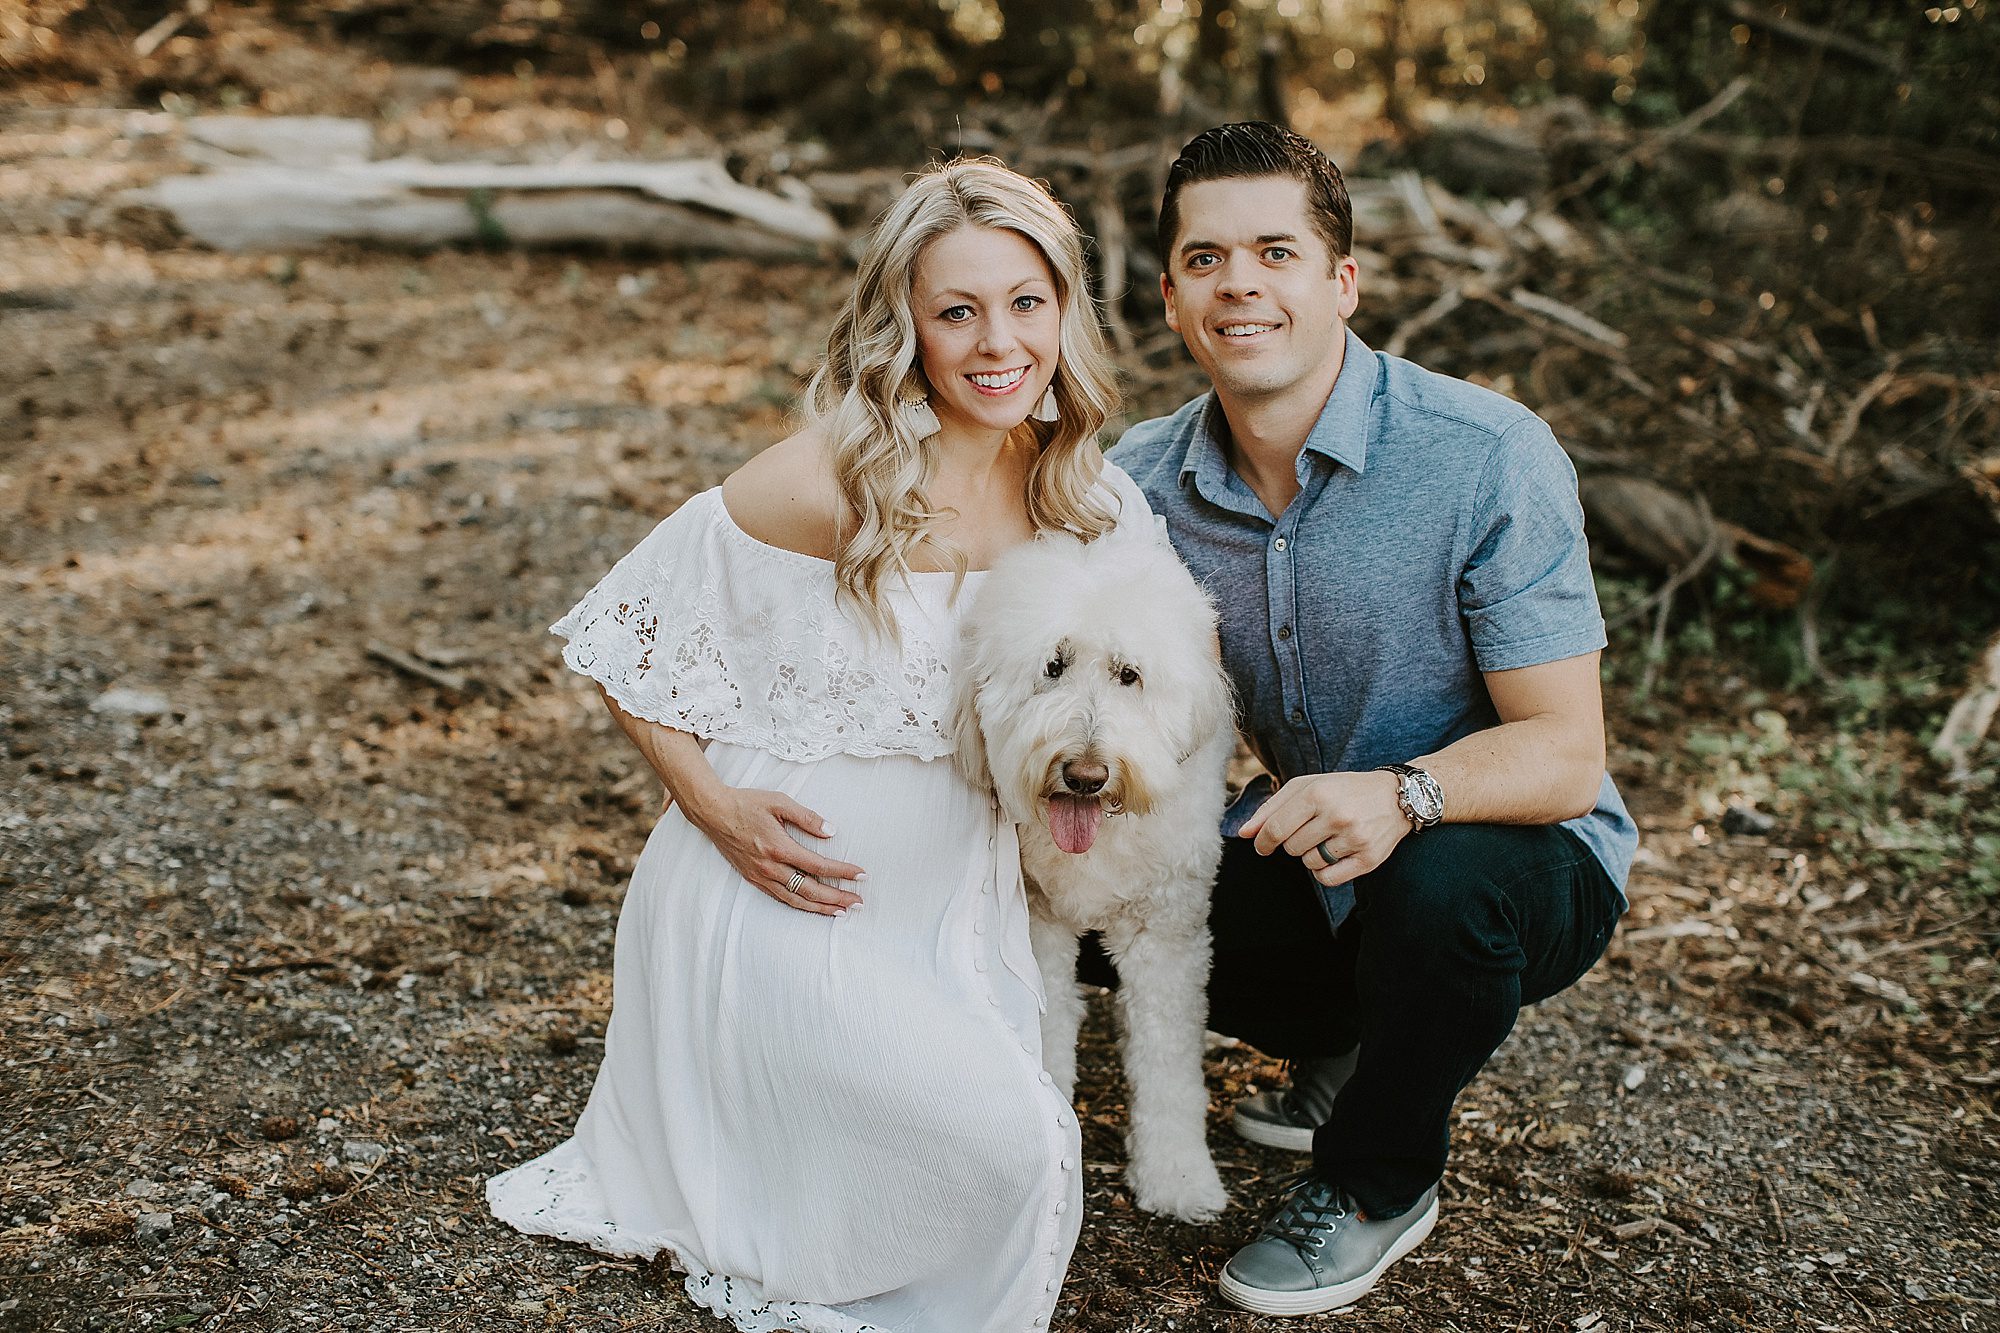 beach maternity couple poses, maternity pictures with dog, Maryland Maternity Photography, Organic Maternity Pictures, Couple maternity, Maternity pictures with a dog